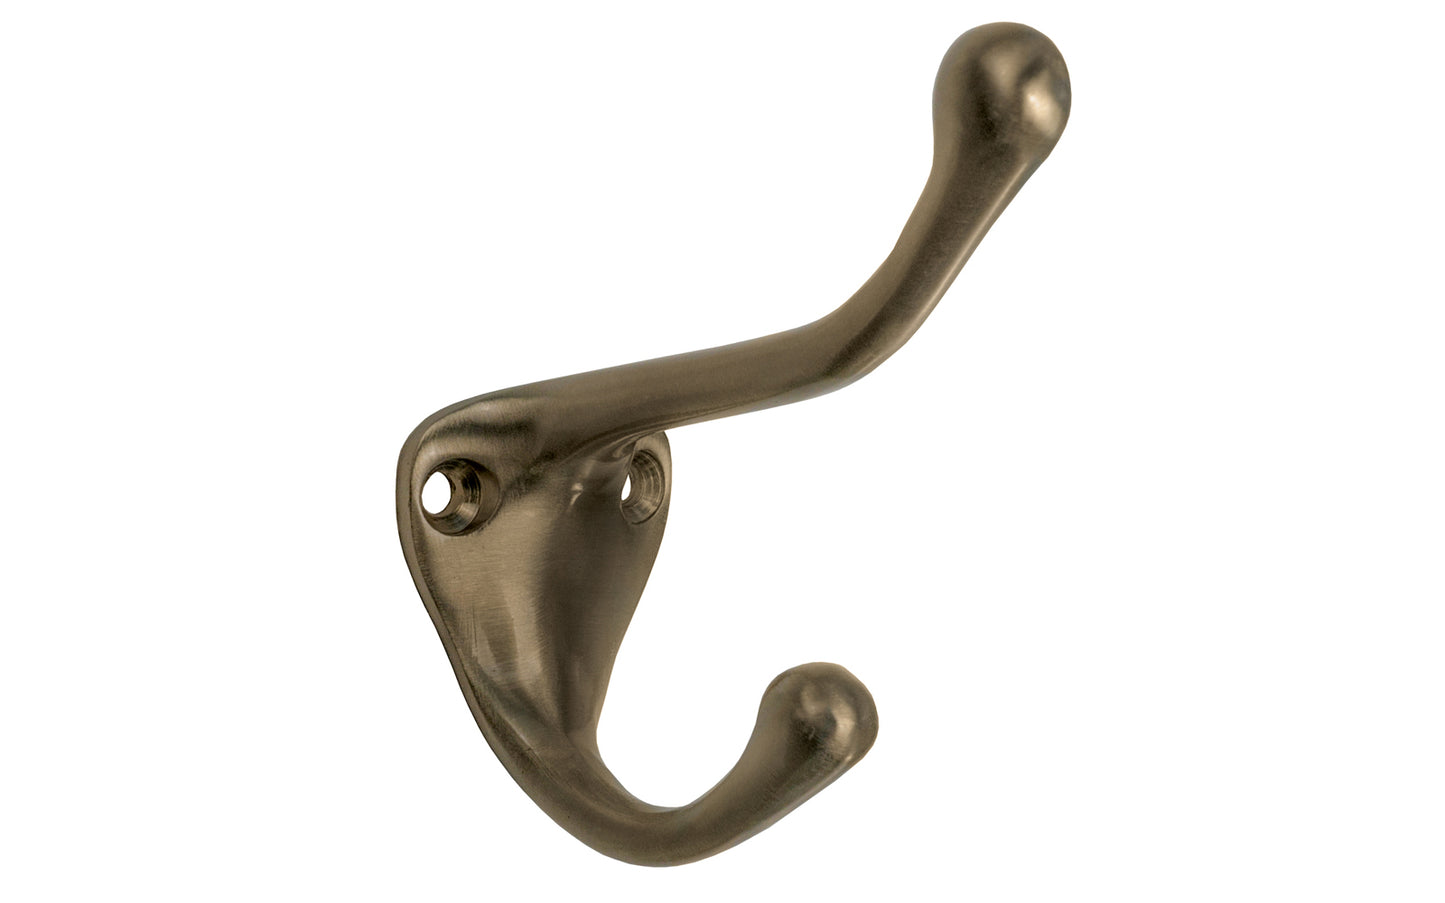 Ives Classic Solid Brass Double Hook. Great for kitchens, bathrooms, hallways, furniture, cabinets, bedrooms. The two prong hook is made of solid brass material, making it durable for clothing, towels, bags. Hat & Coat Hook. Antique Brass Finish.